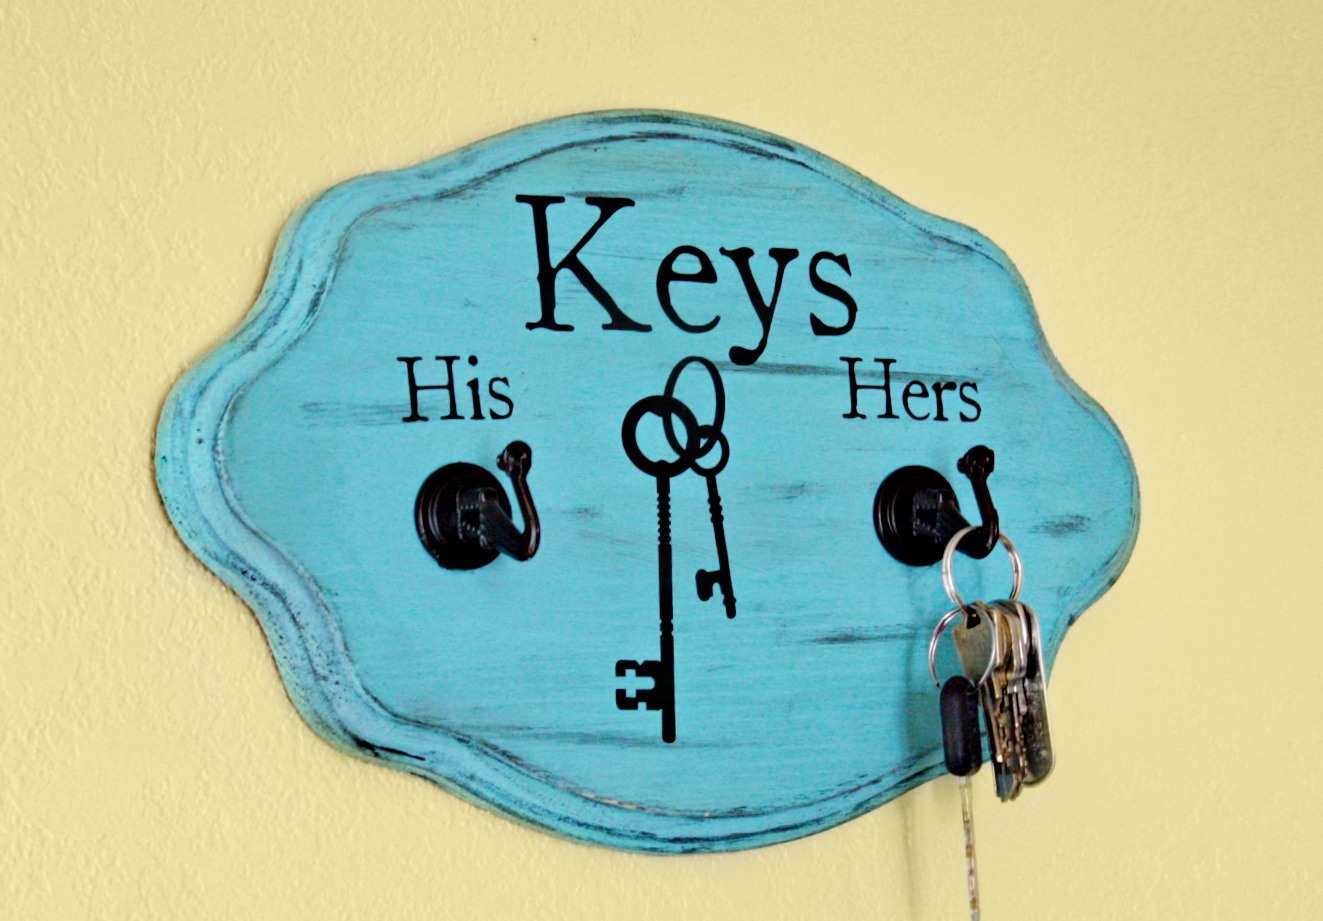 This are my keys. Where are my Keys ключи?. Hooked on you ключ. Lost my Keys. Keyholder Space.